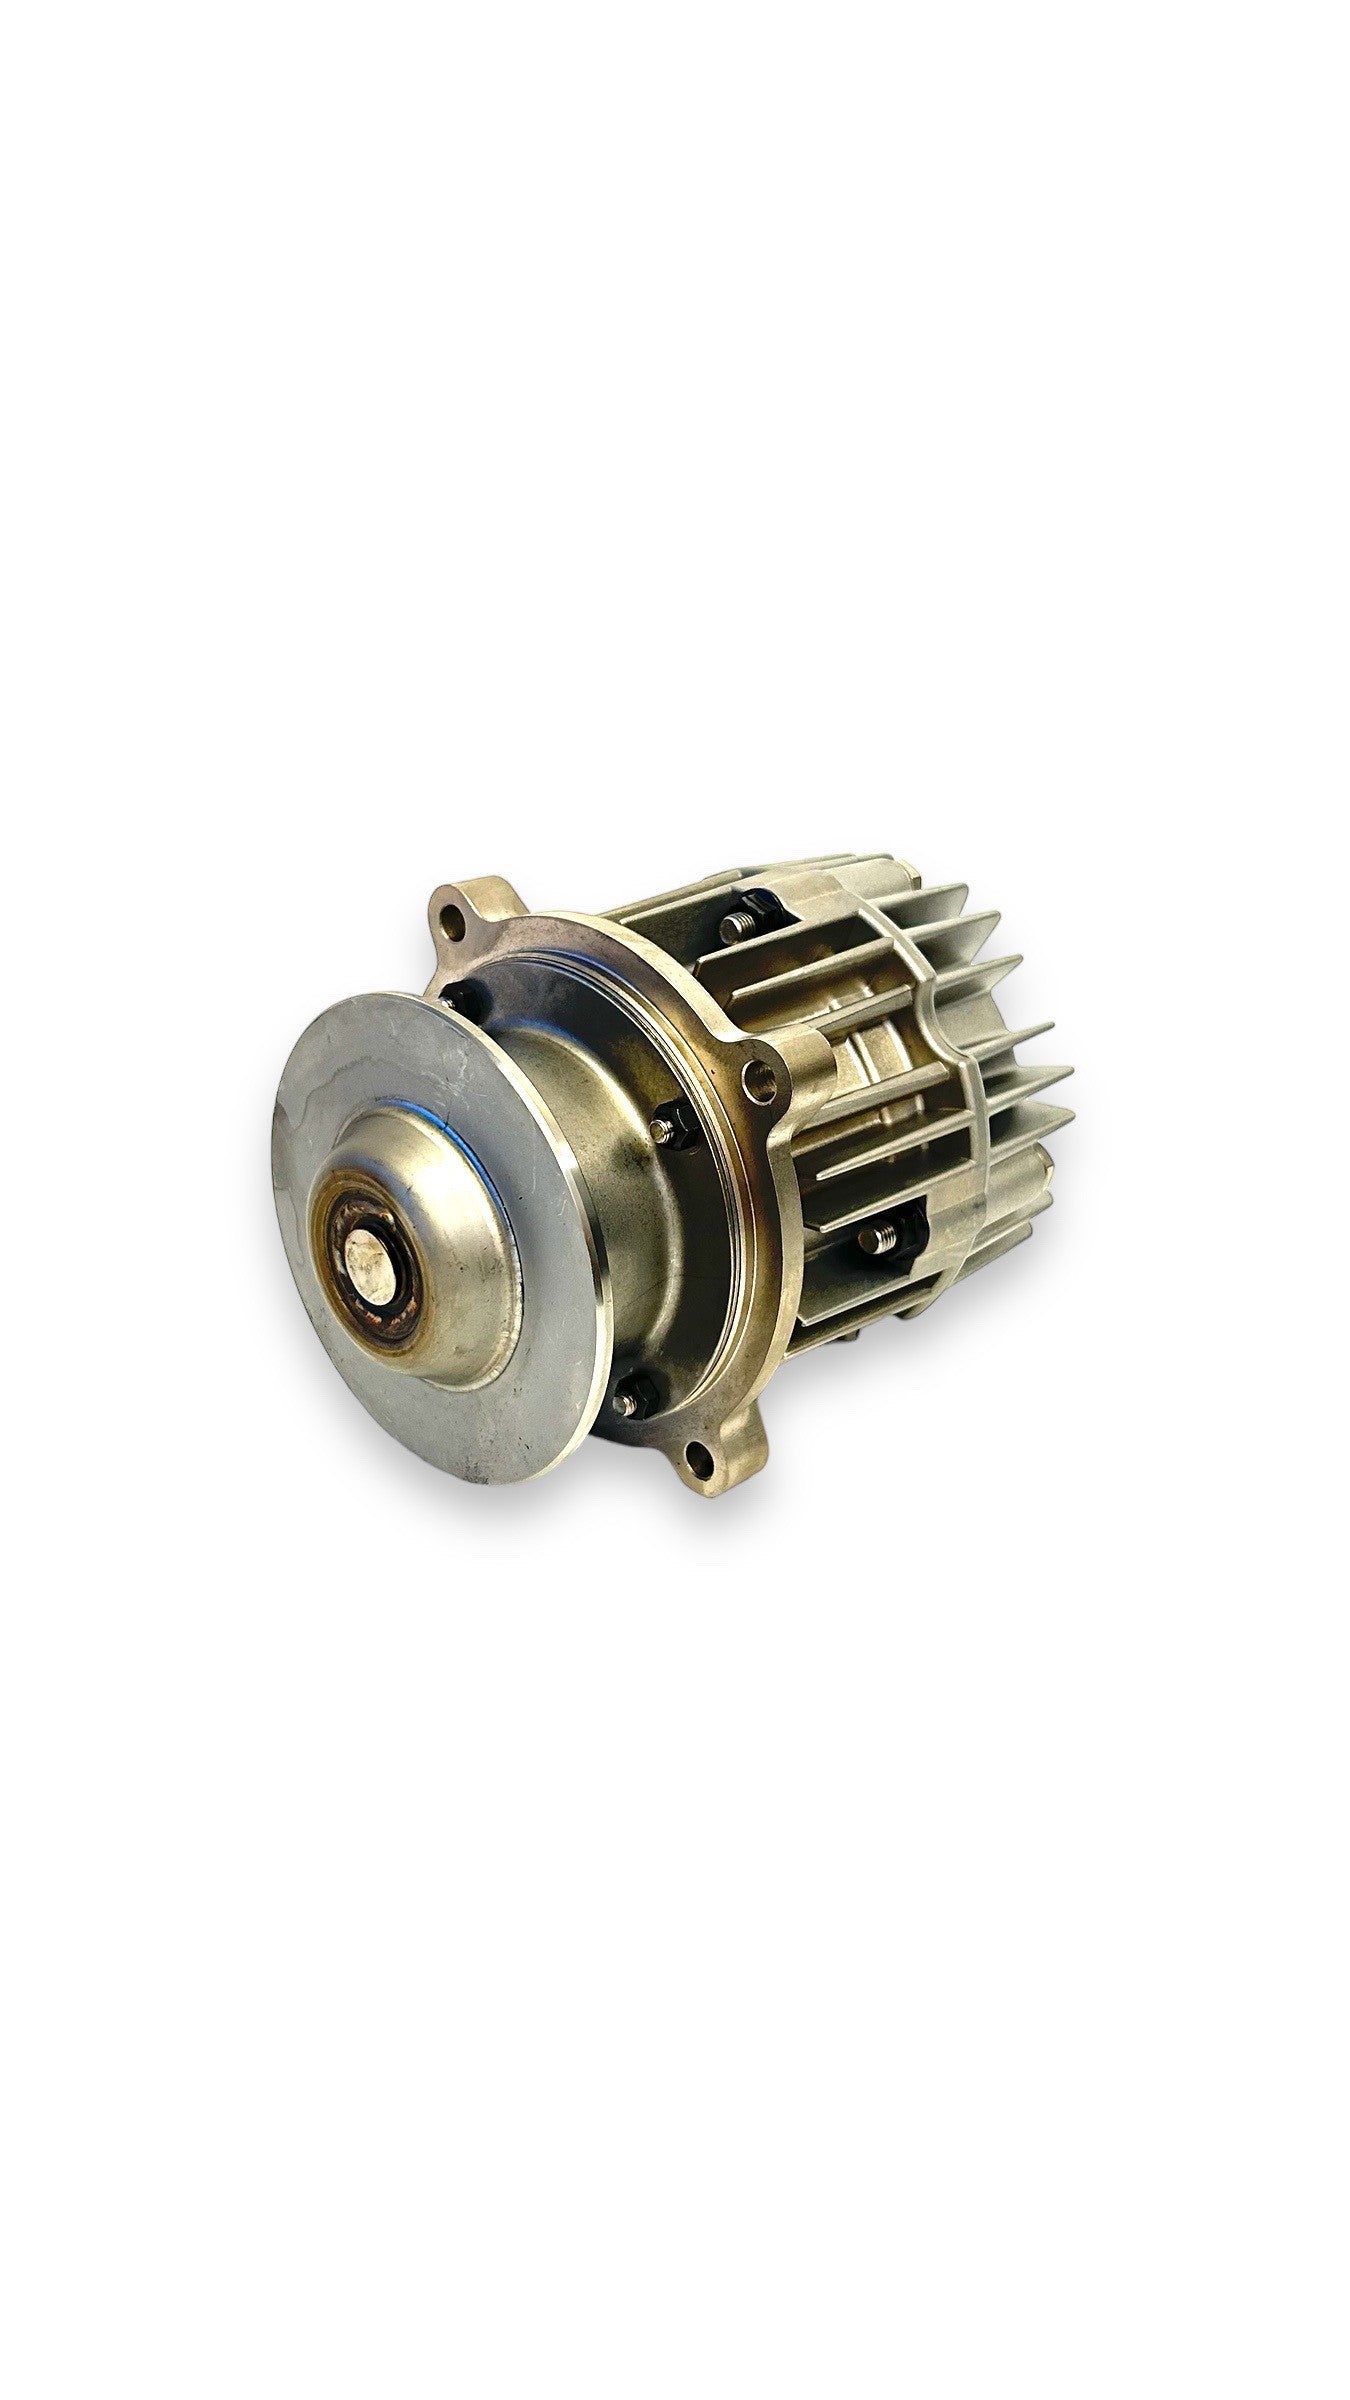 Exhaust Pressure Governor for Volvo Truck Engines